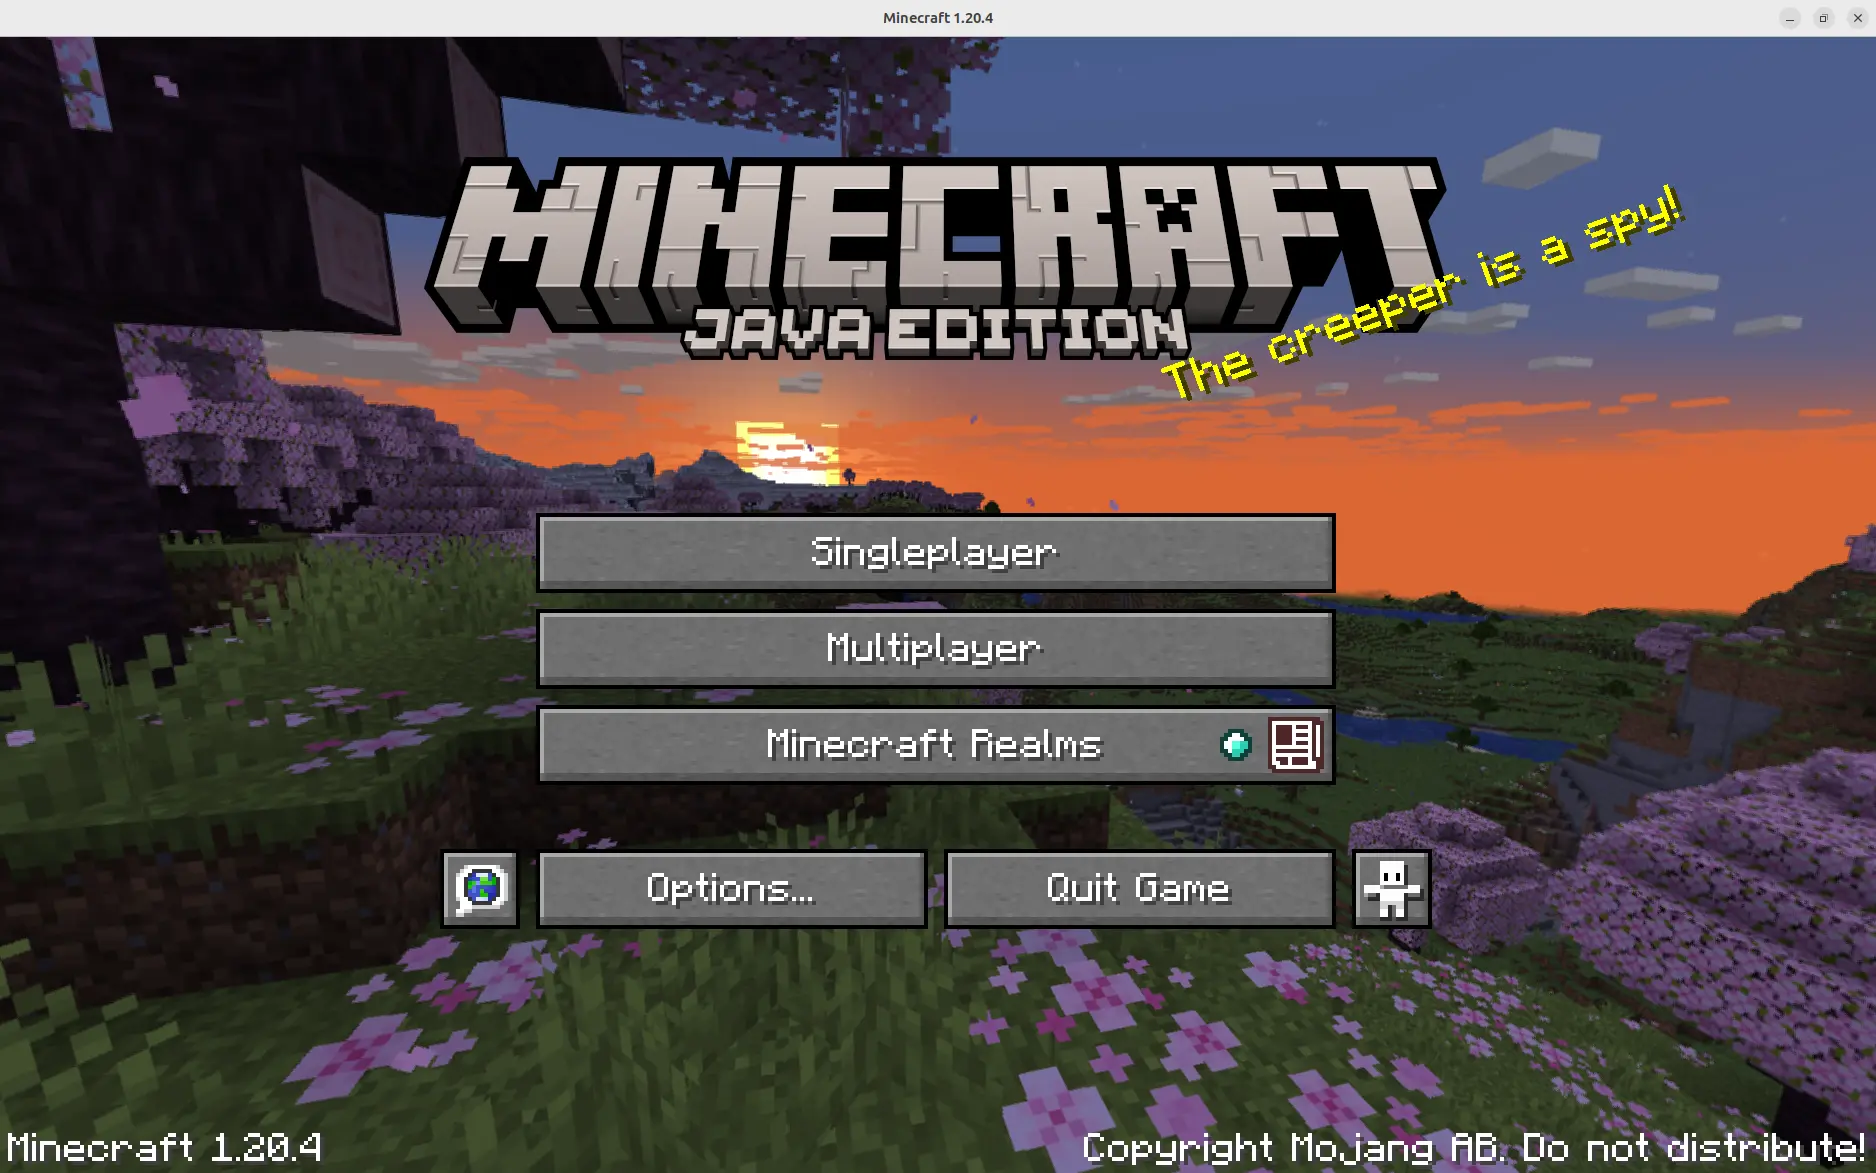 Minecraft Java Edition showing Singleplayer or Multiplayer options.